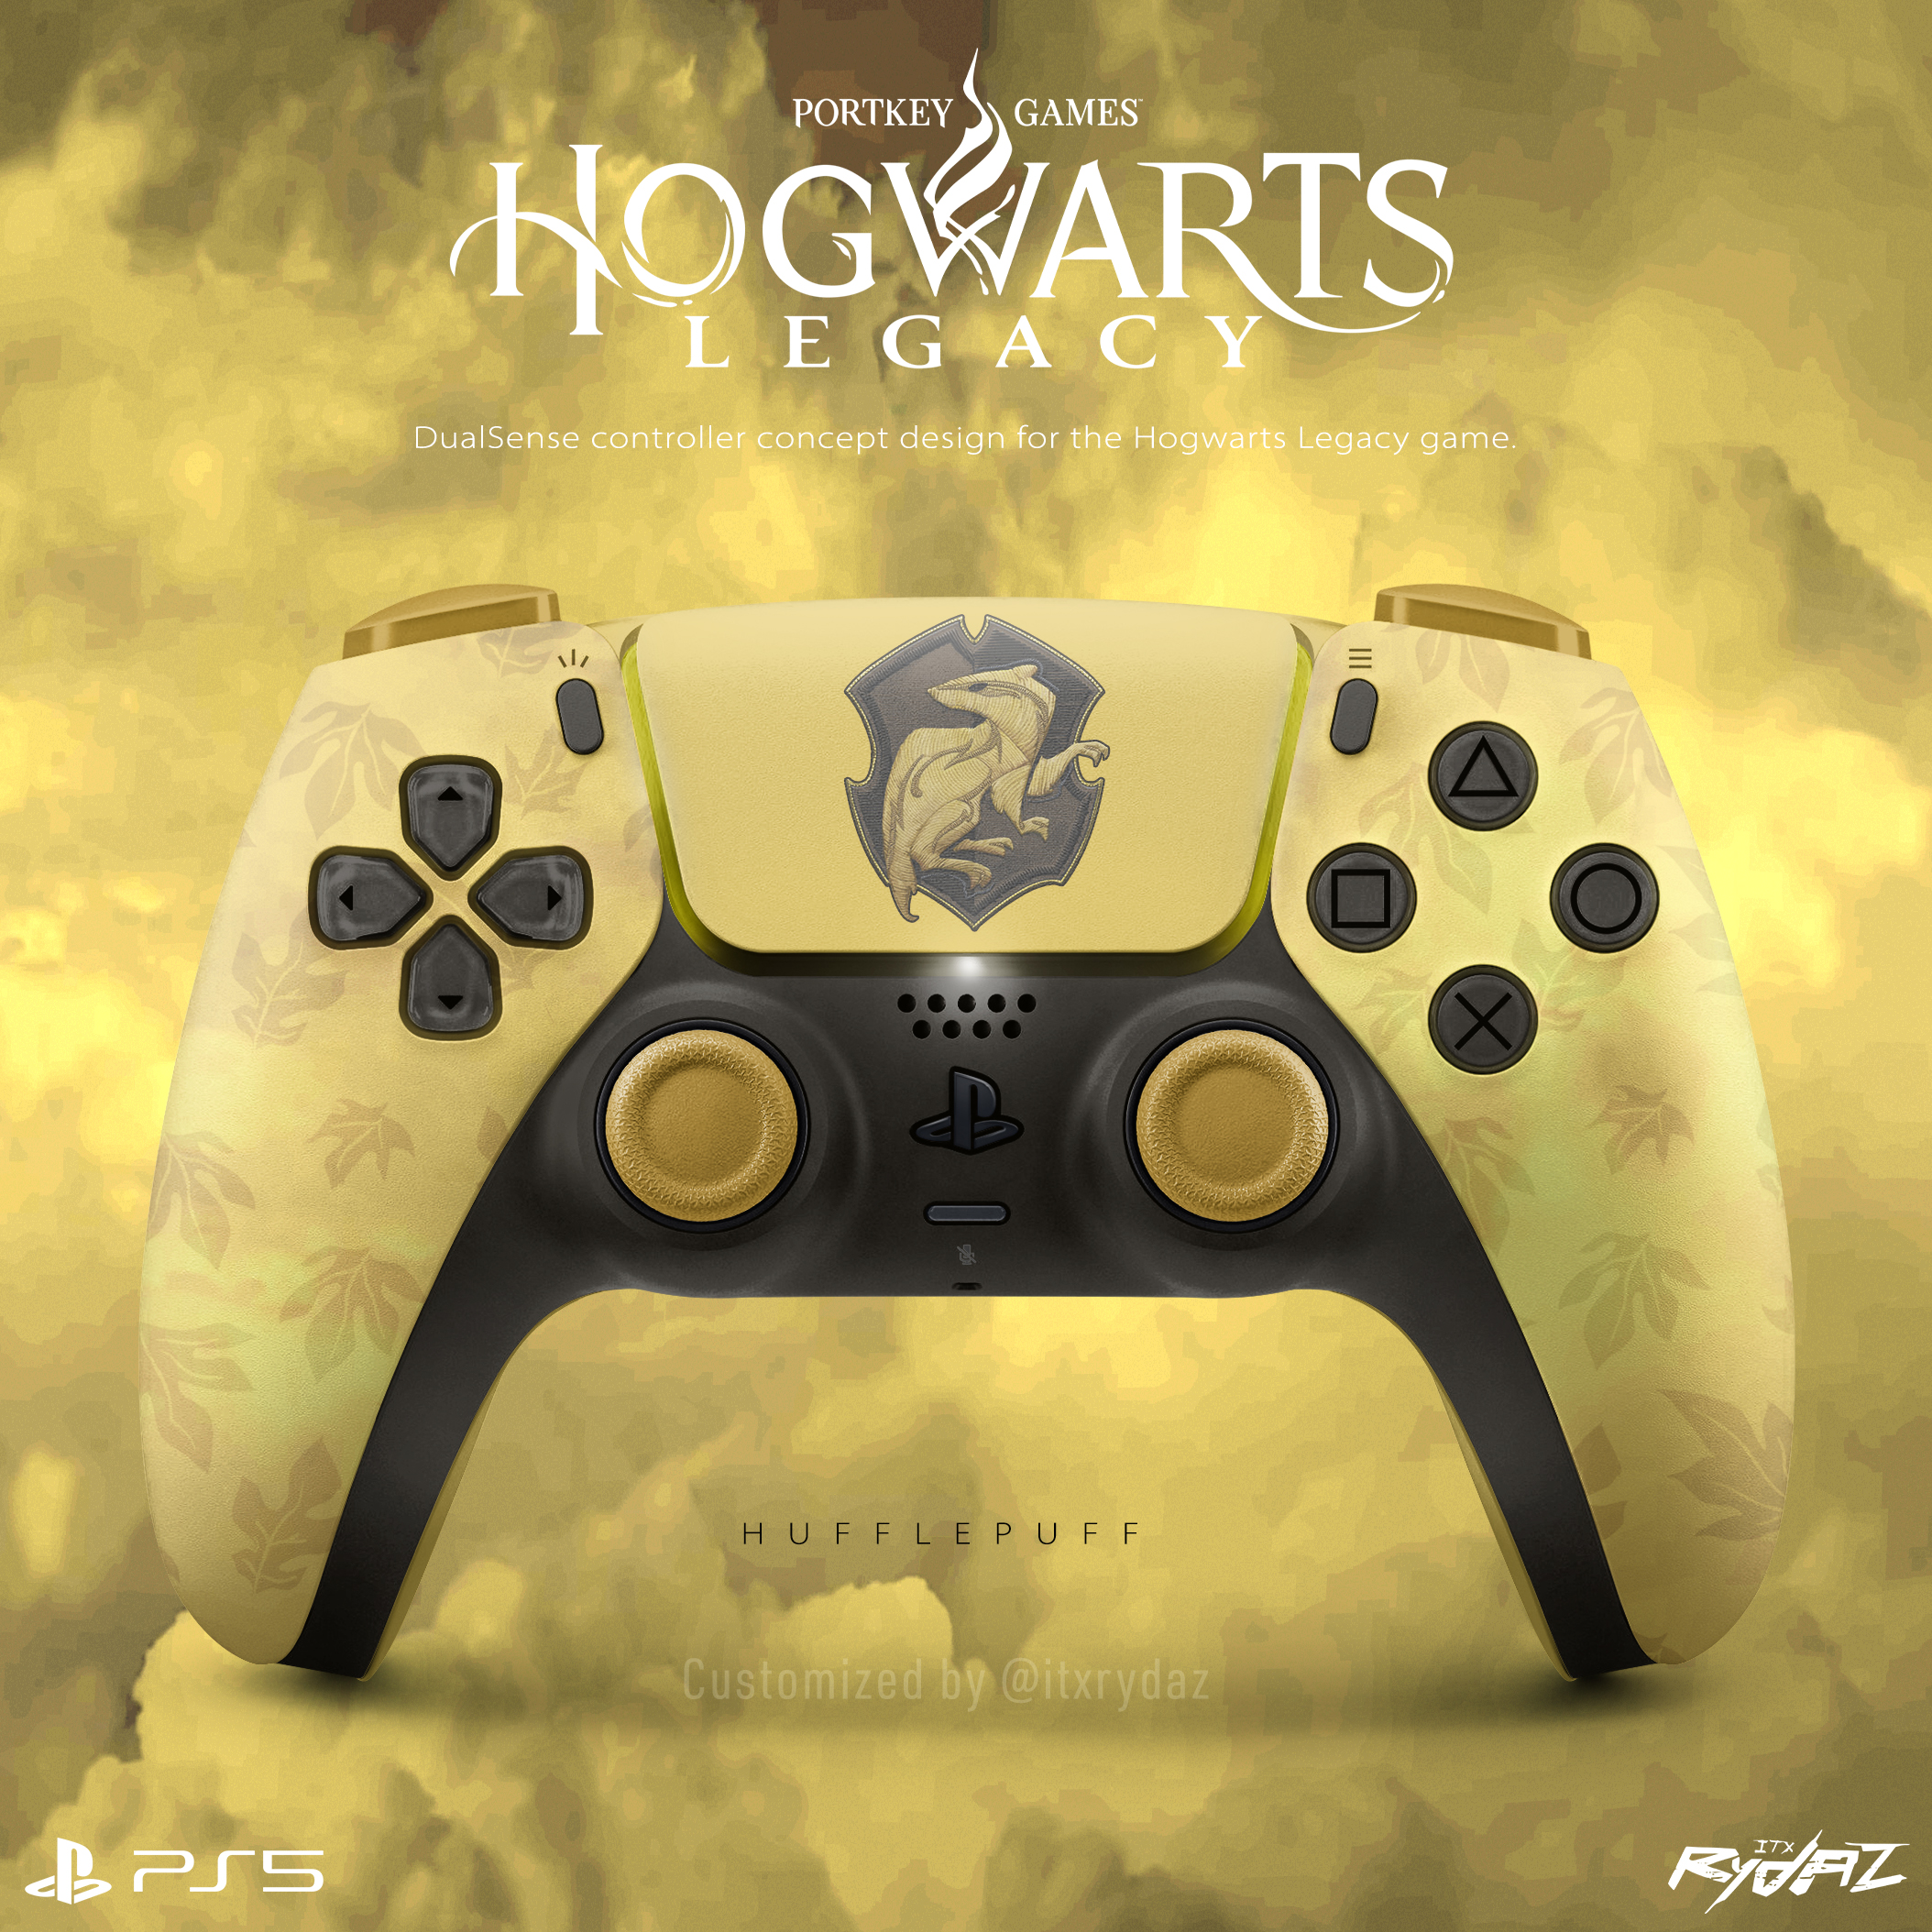 The Ultimate Secret To Mastering Your Games: Harry Potter PS5 Controller